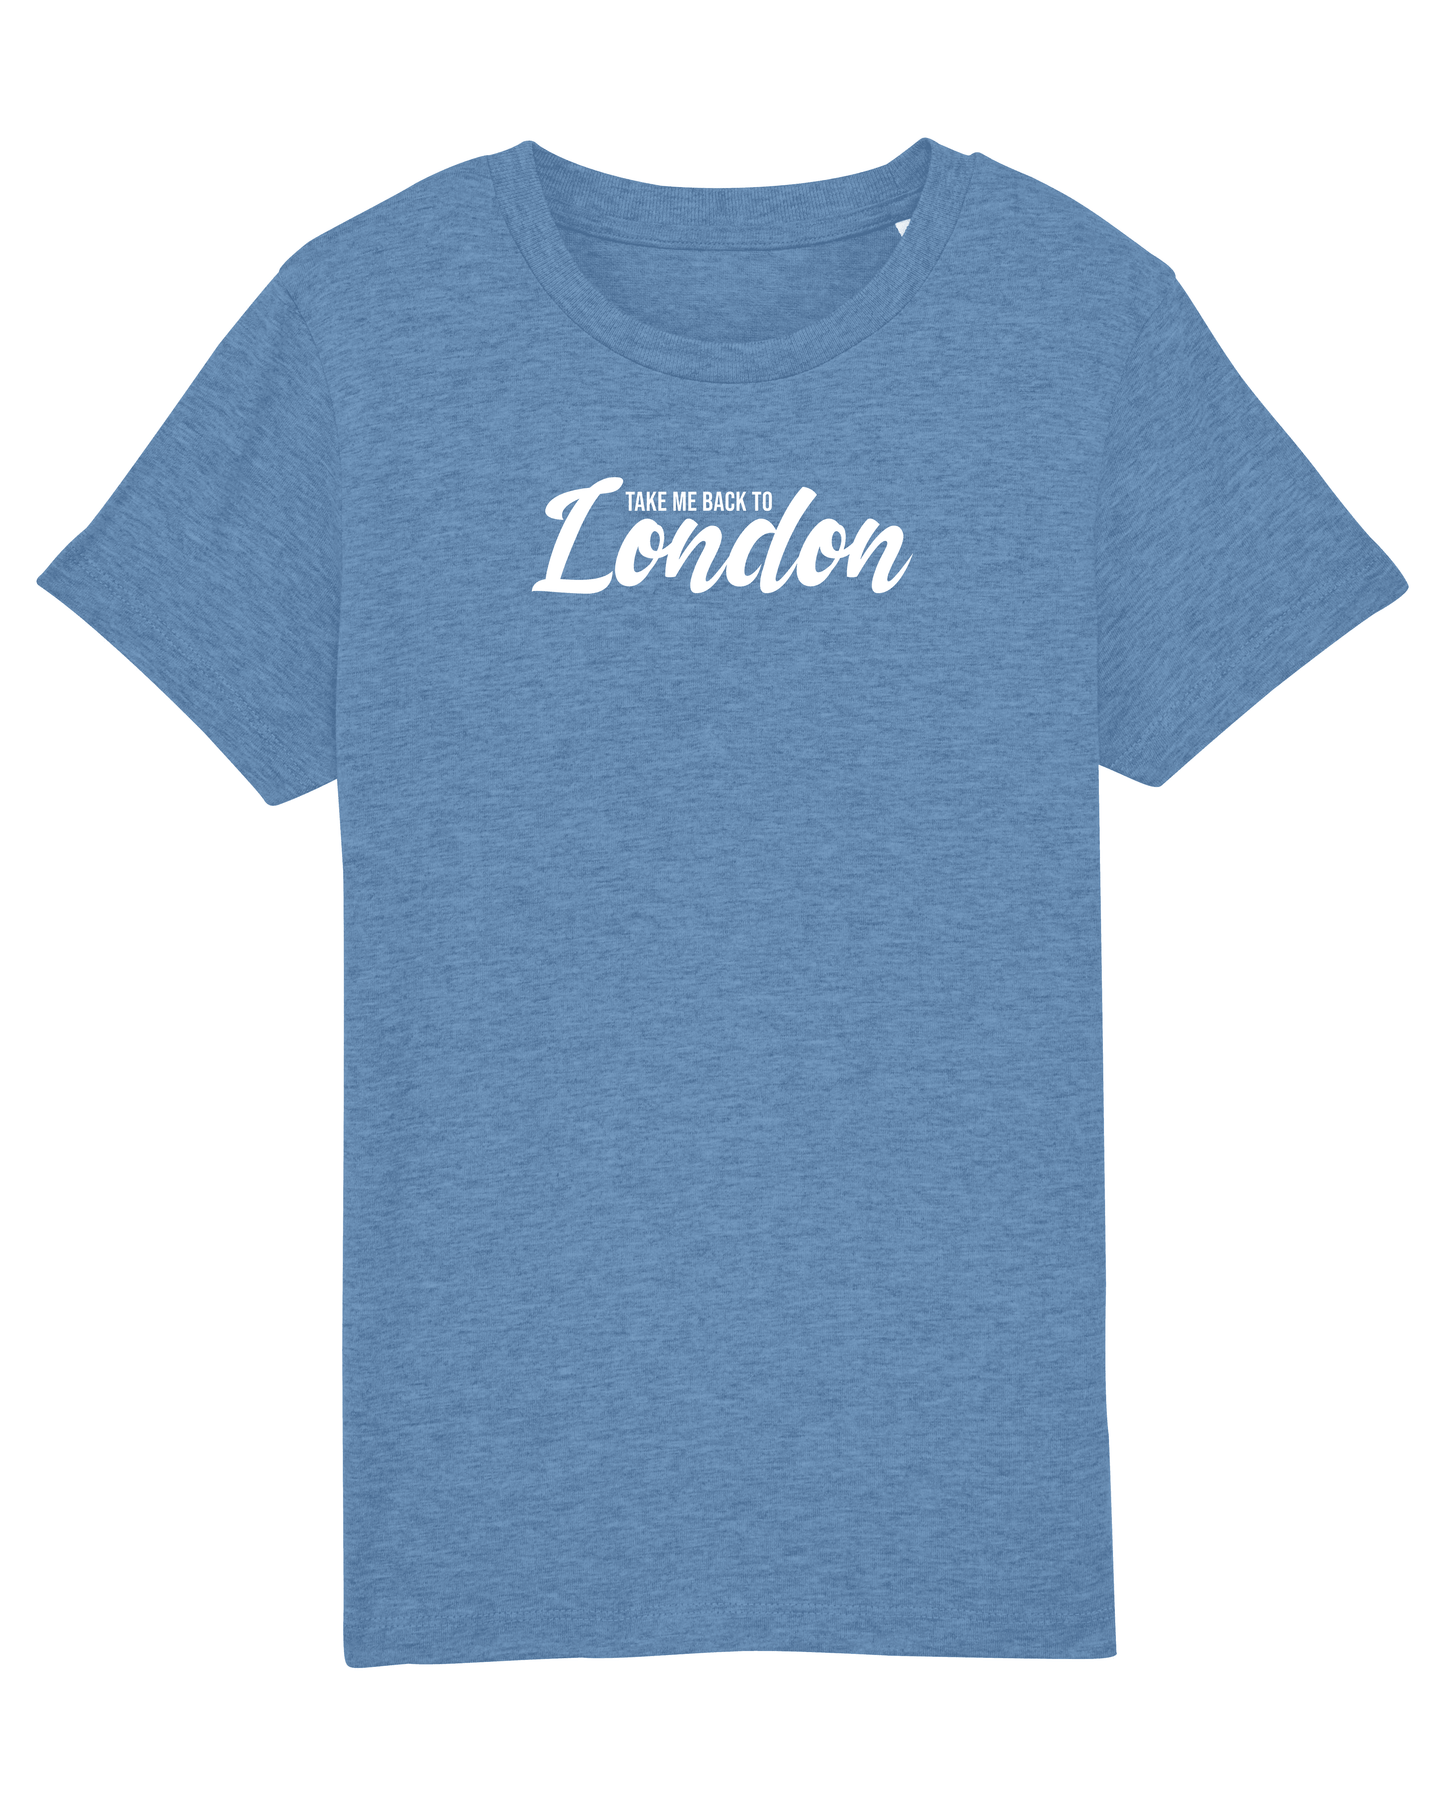 TAKE ME BACK TO LONDON - Toddler and Youth T-Shirt - Little Mate Adventures